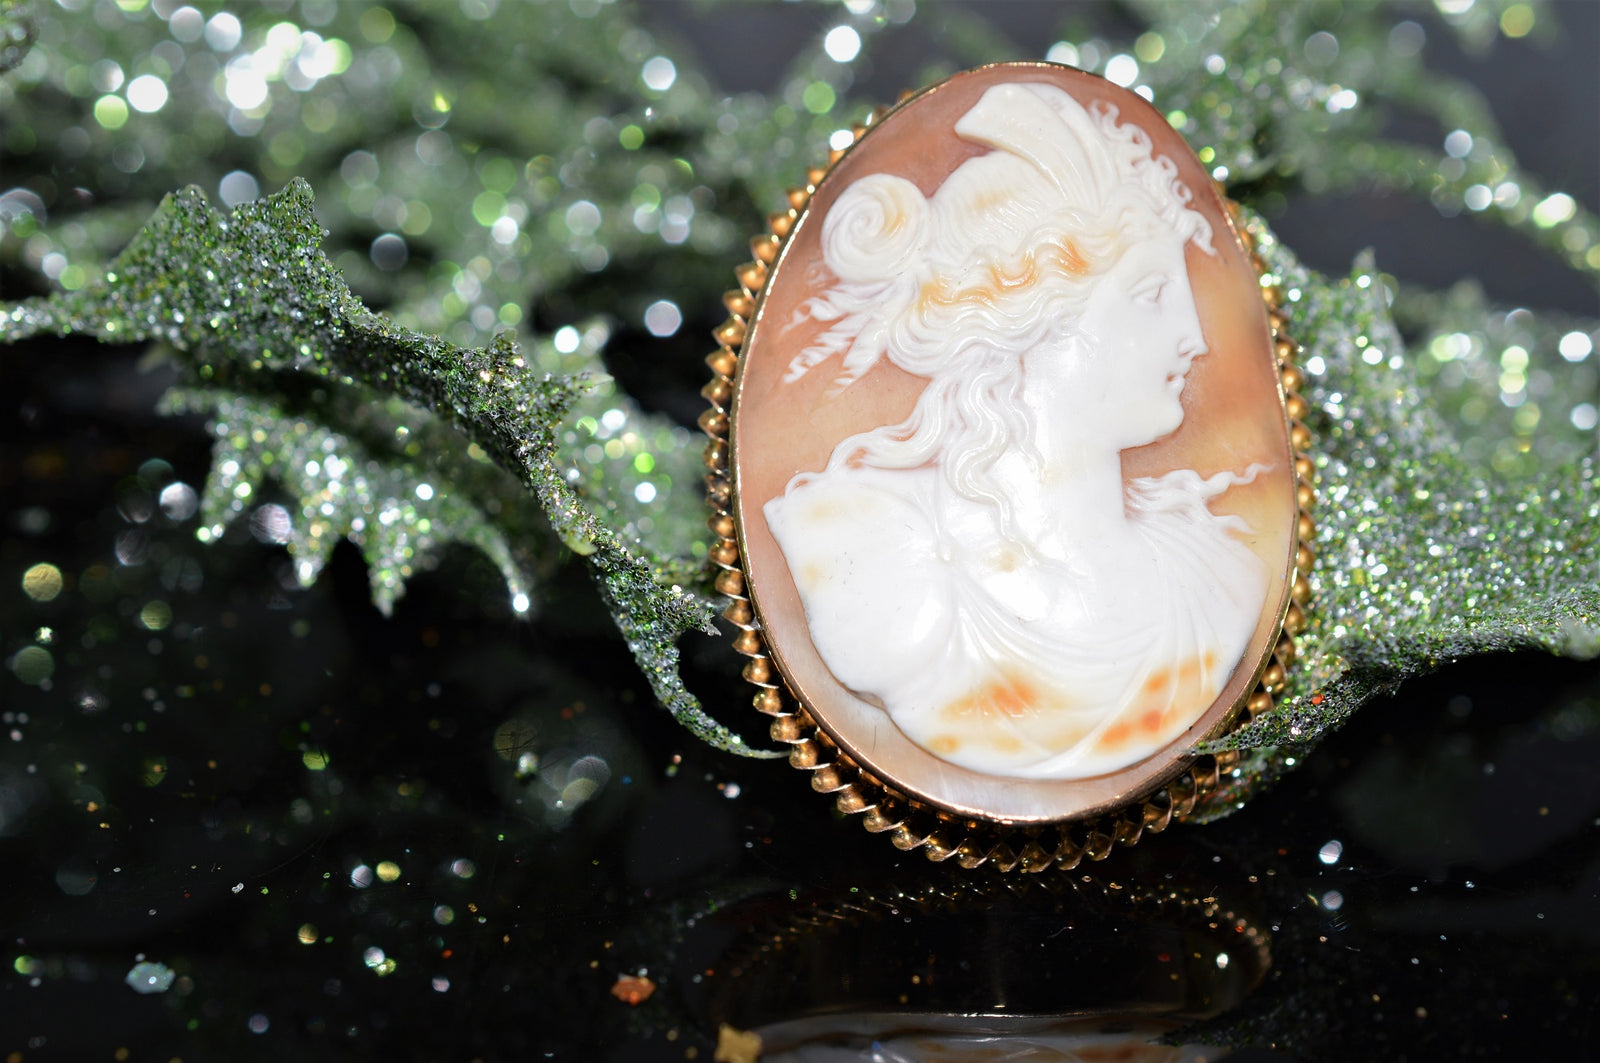 10K and 14K Yellow Gold Oval Shell Cameo Pendant/Brooch - Howard's DC